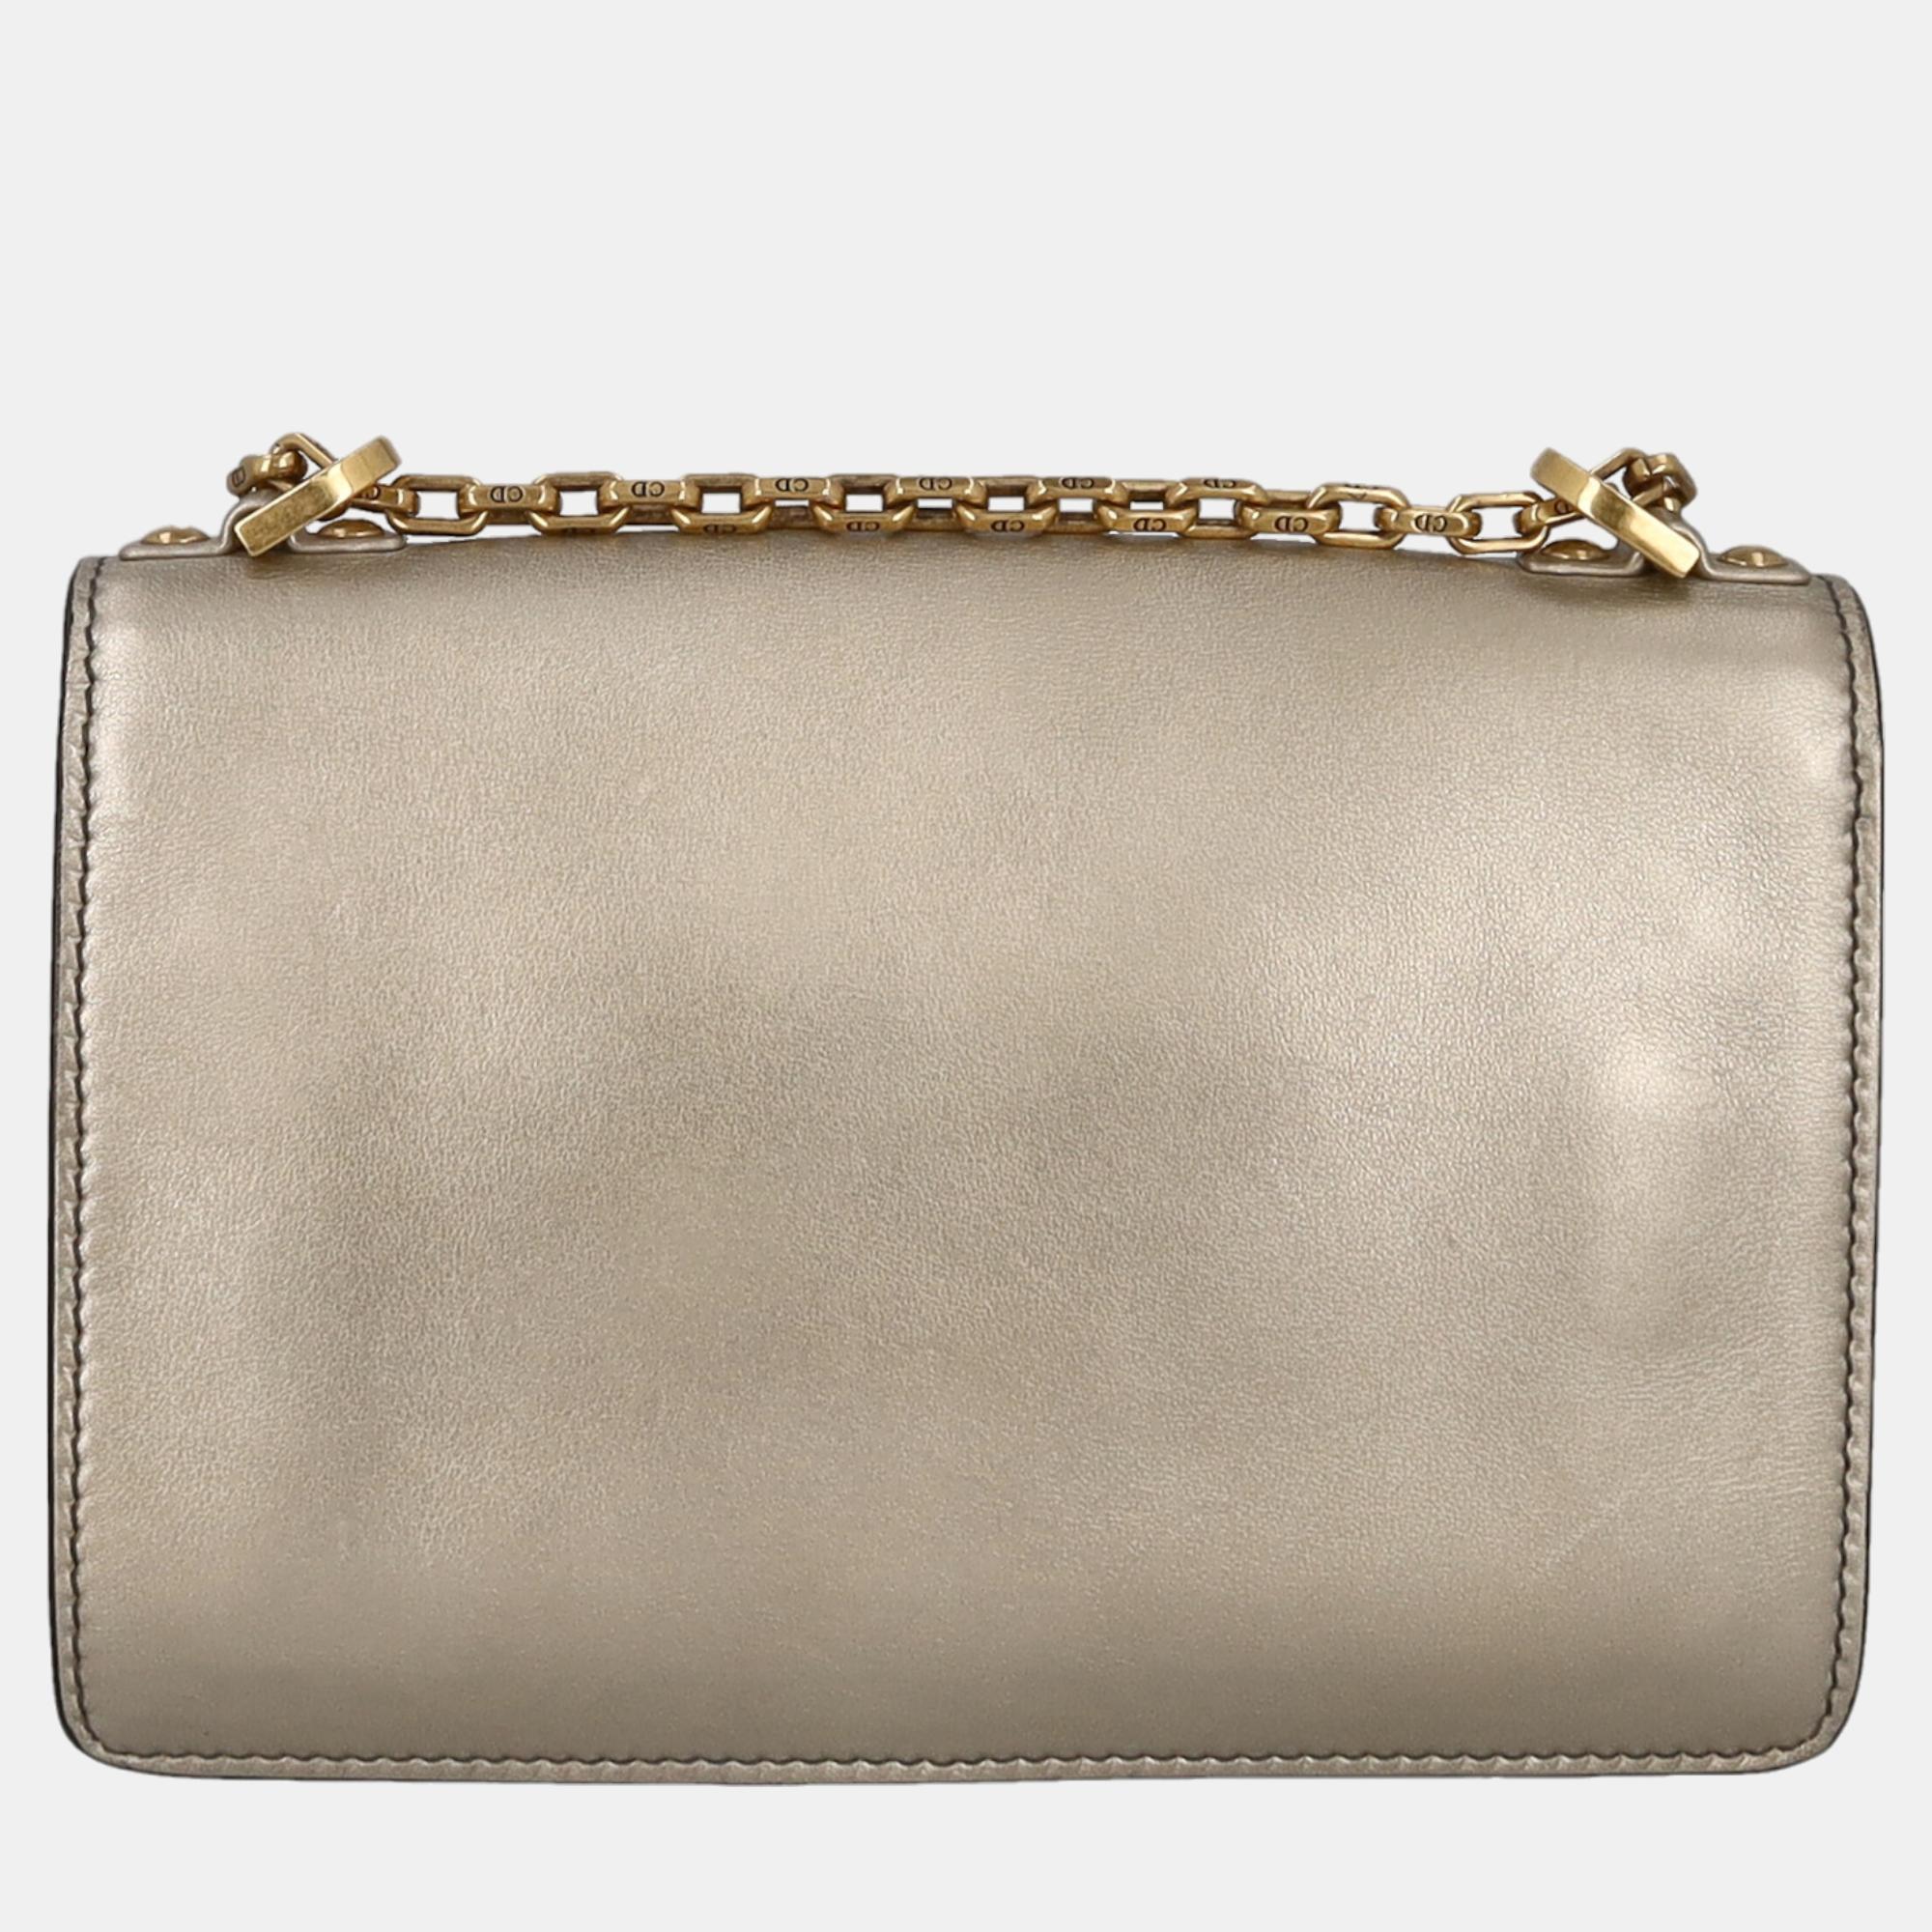 Dior  Women's Leather Shoulder Bag - Silver - One Size